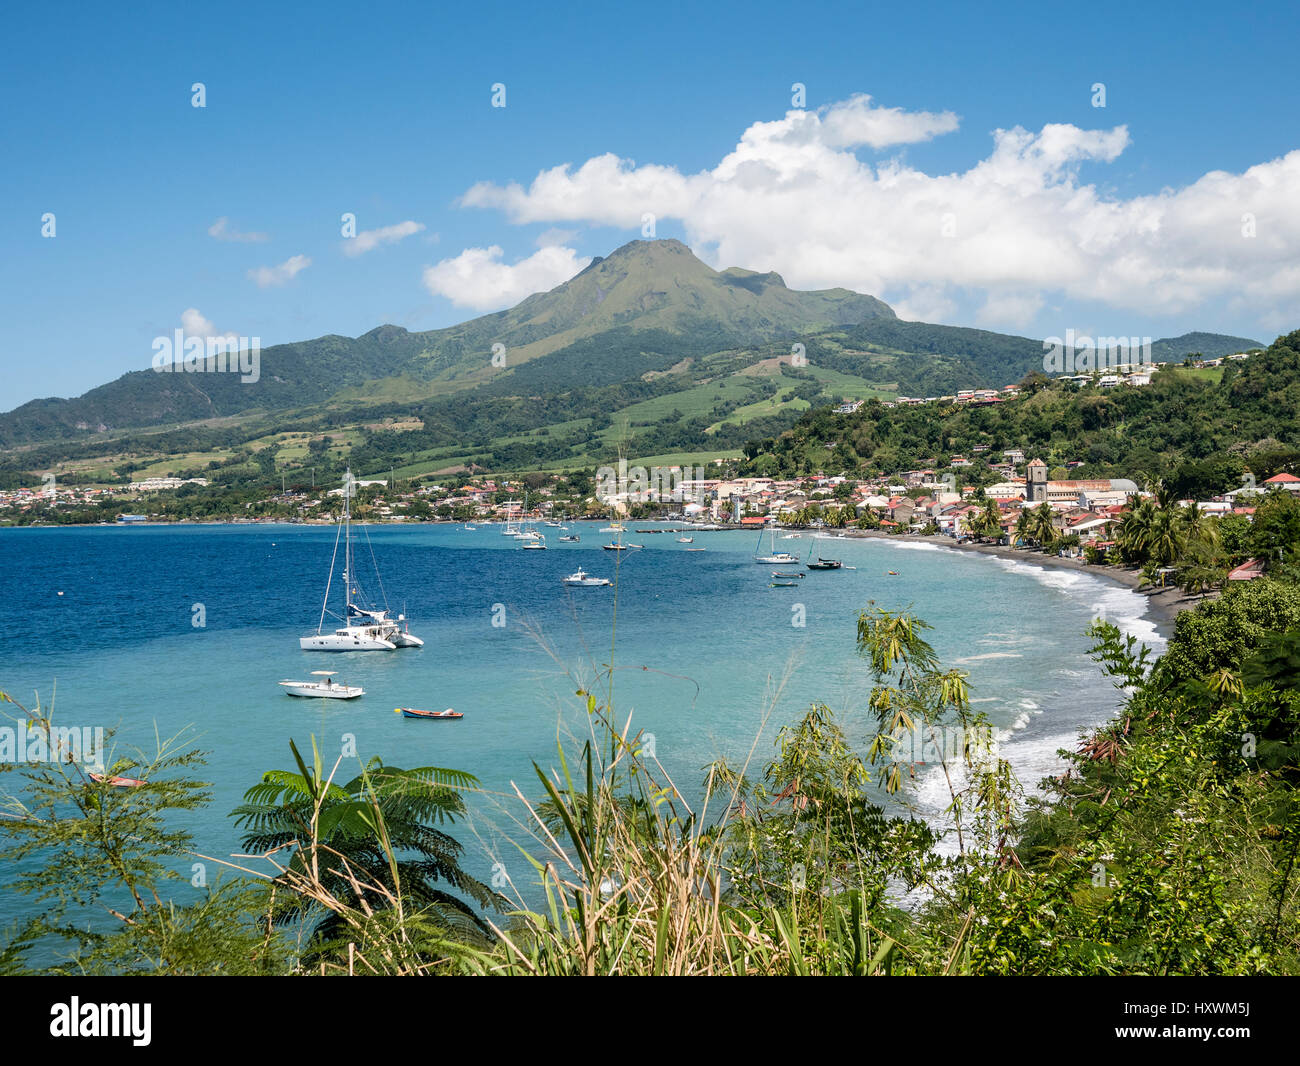 Volcano of Mont Pelee above Town of St. Pierre partly Destroyed by Volcanic Eruption 1902 on Caribbean Island of Martinique Stock Photo